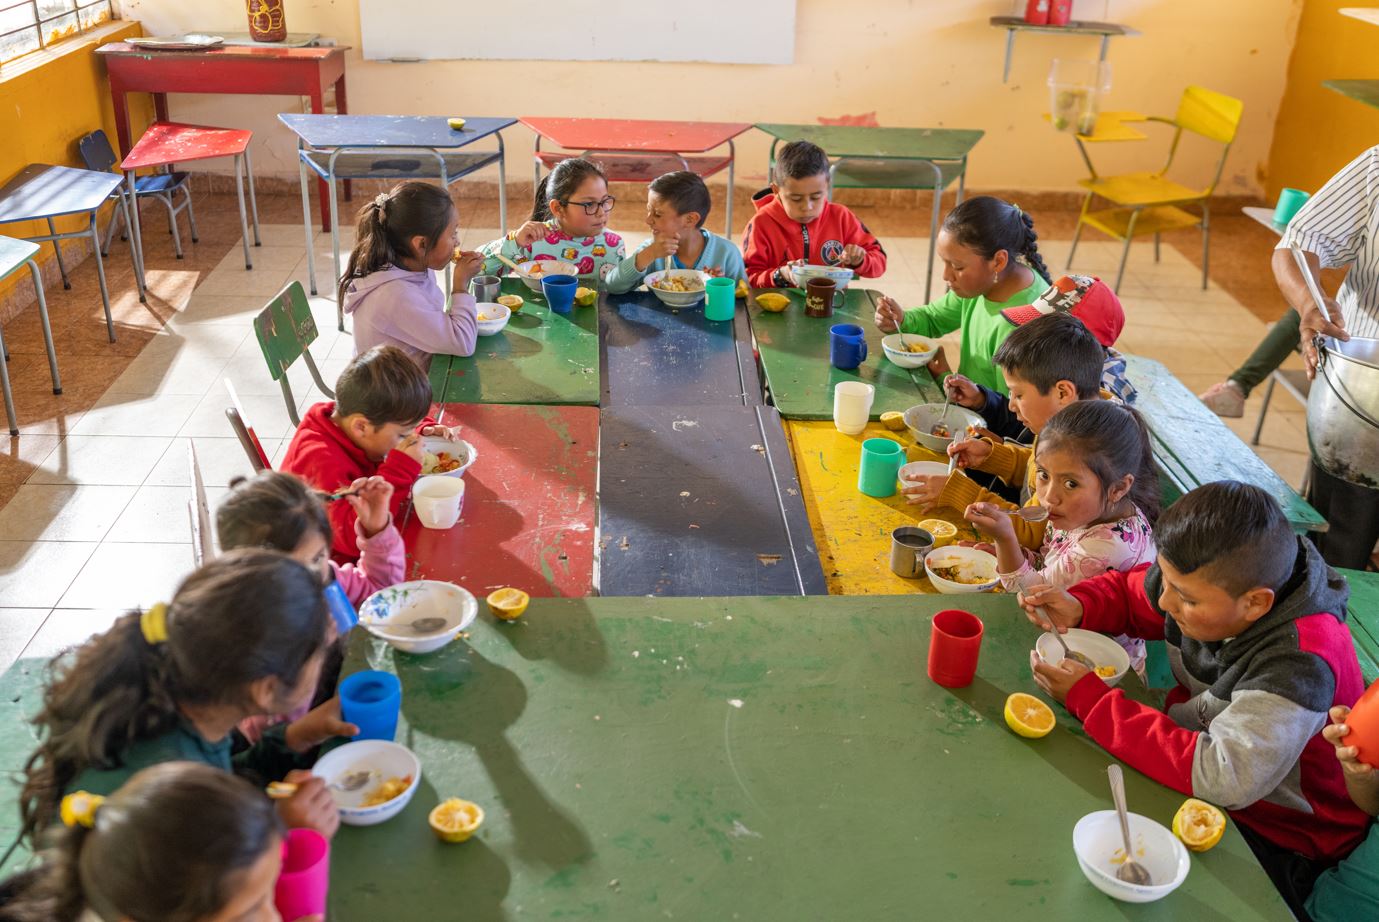 Children sit at a classroom table to eat their school lunch.